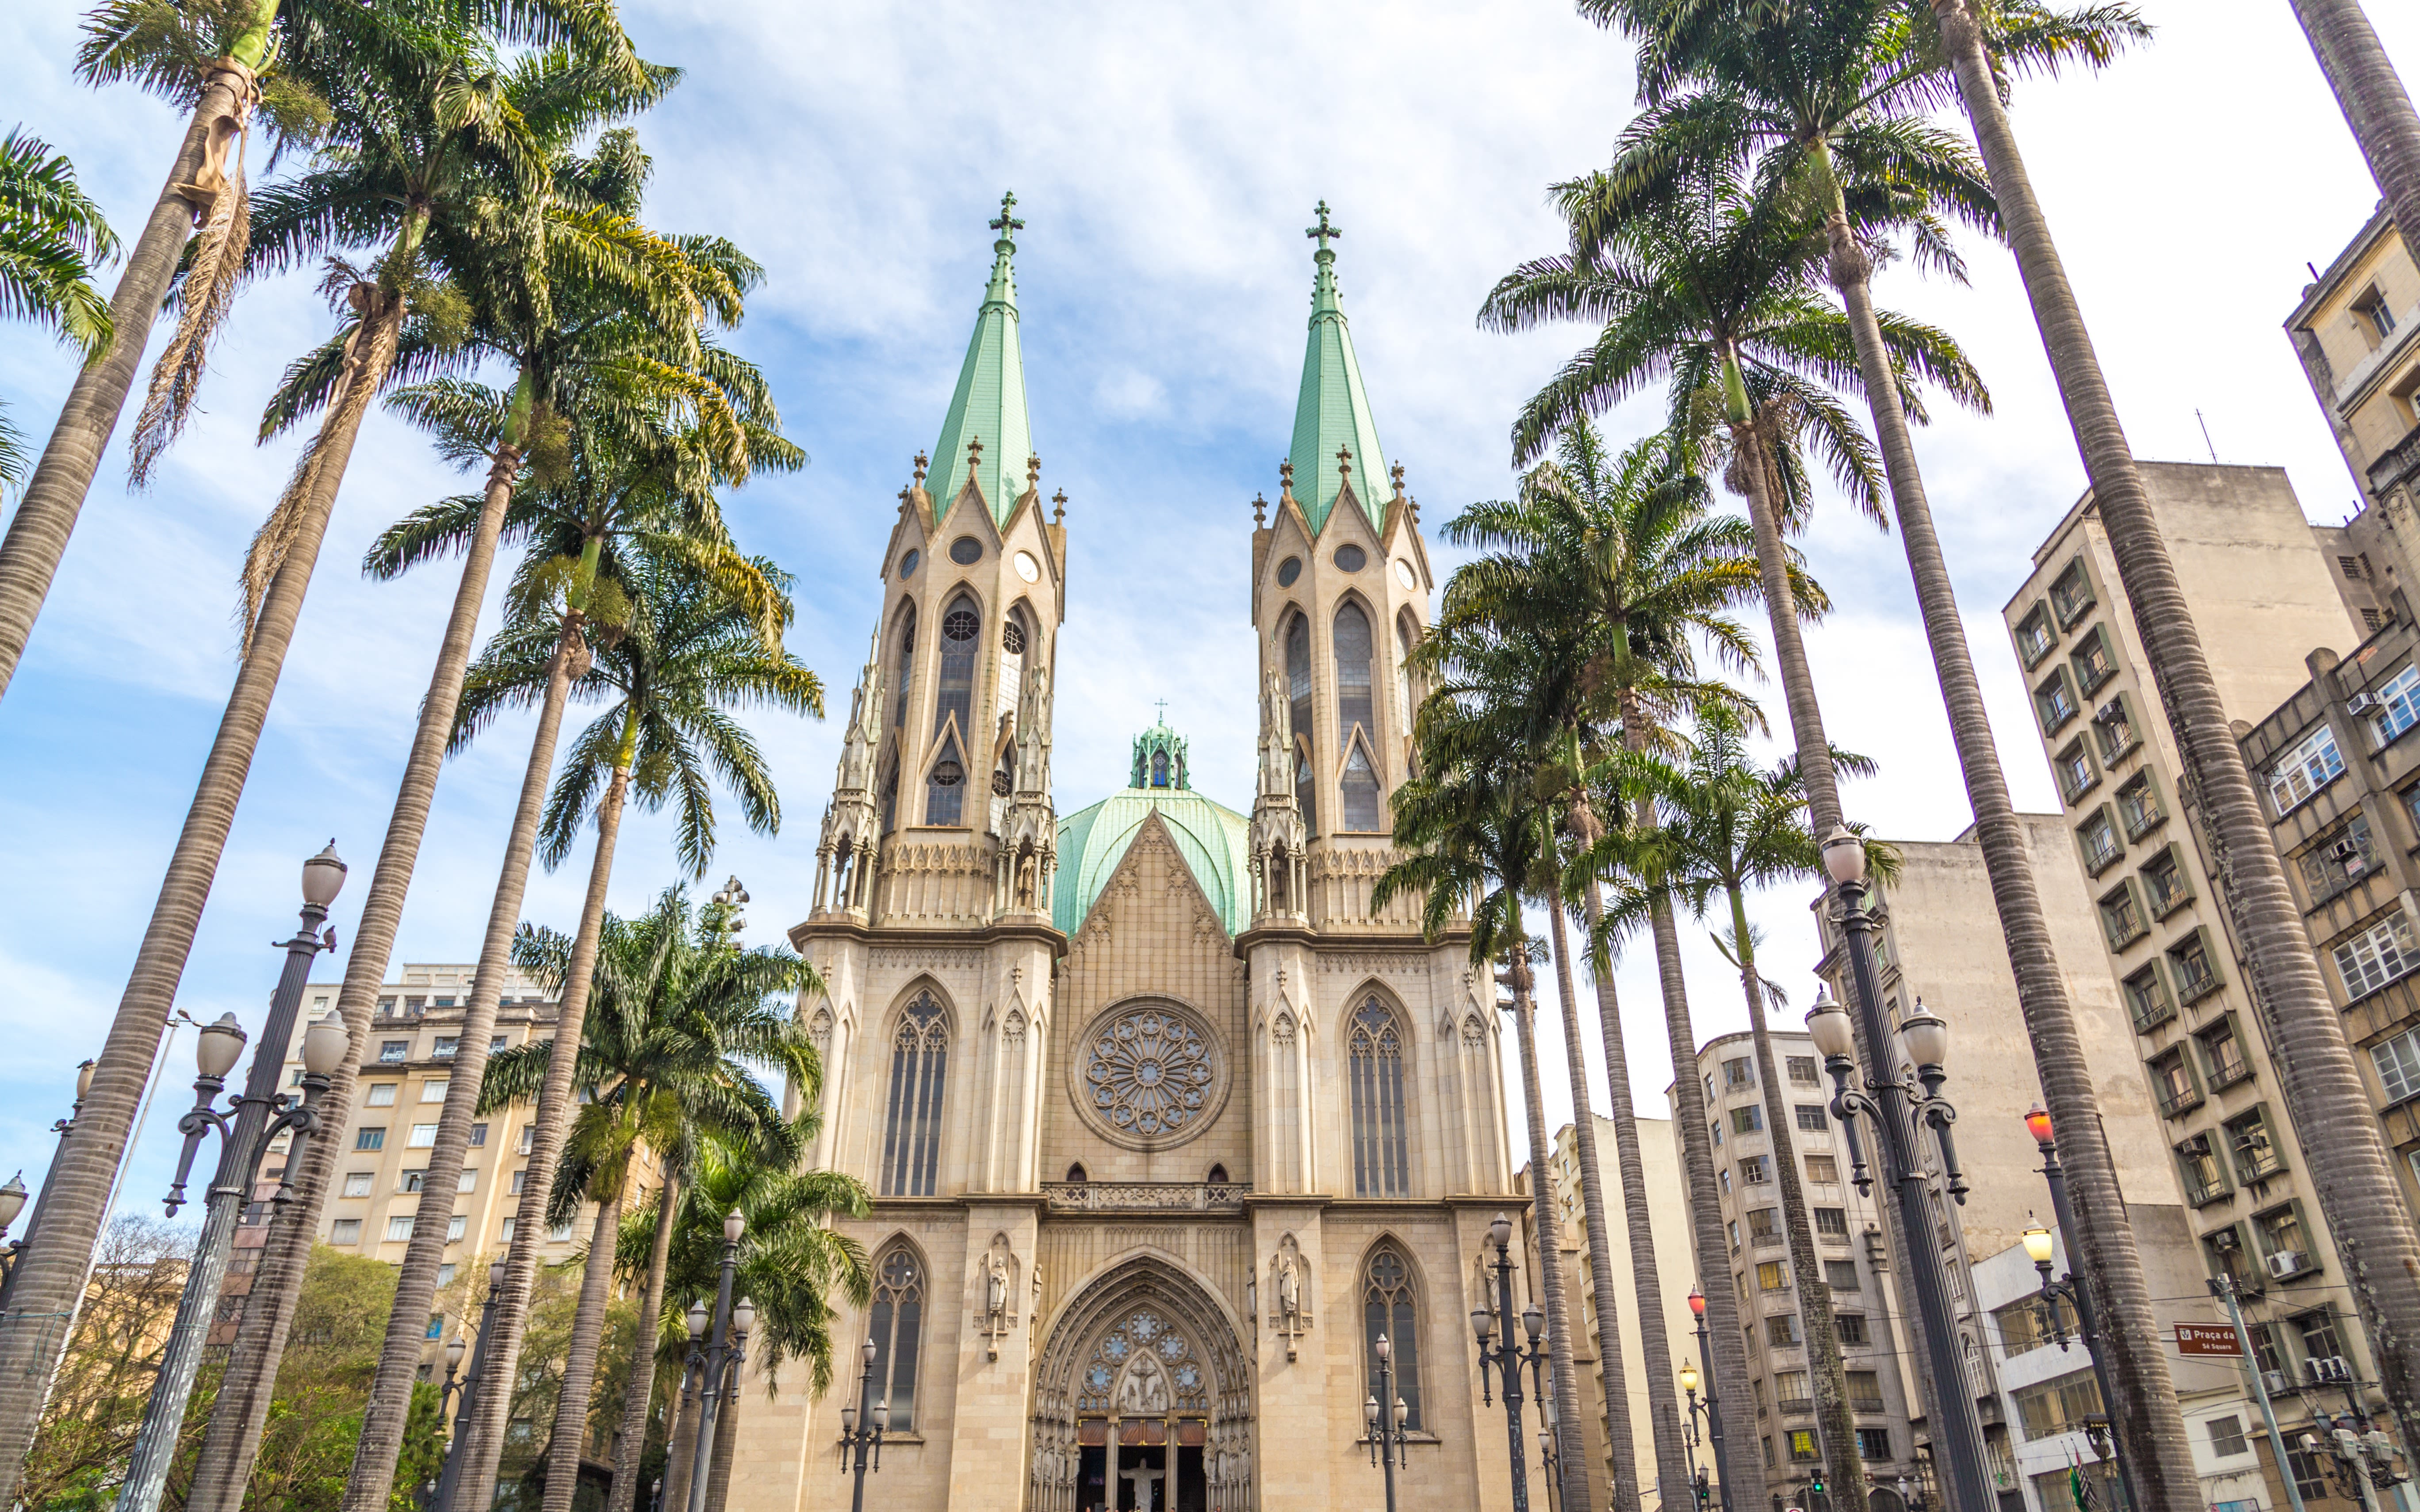 An image of the São Paulo Cathedral